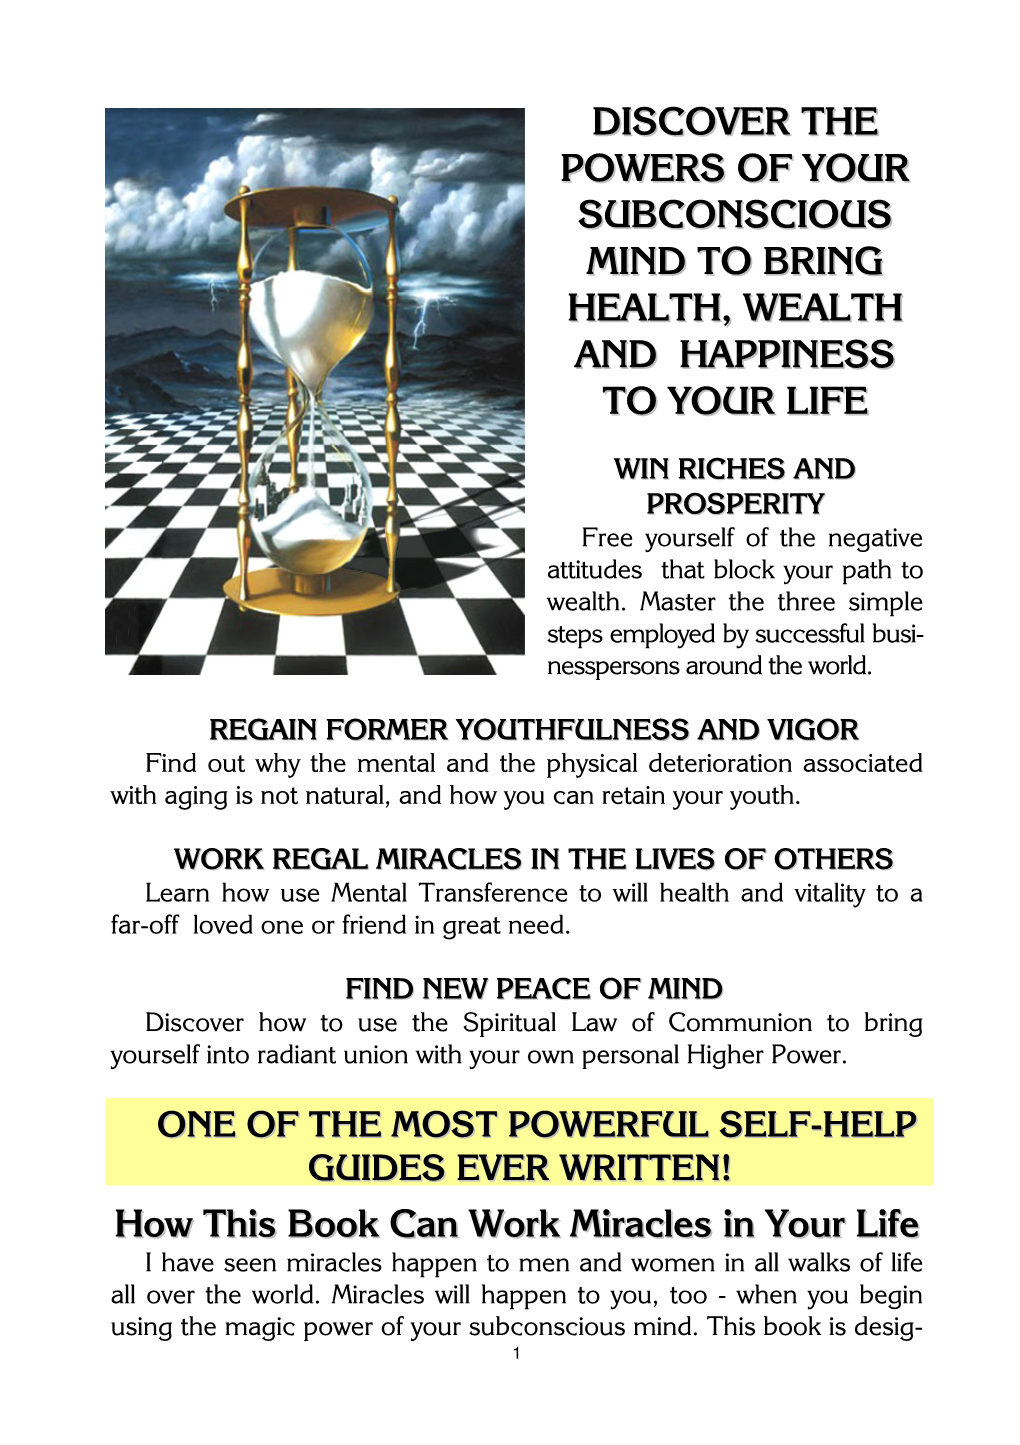 Discover the Powers of Your Subconscious Mind to Bring Health, Wealth and Happiness to Your Life